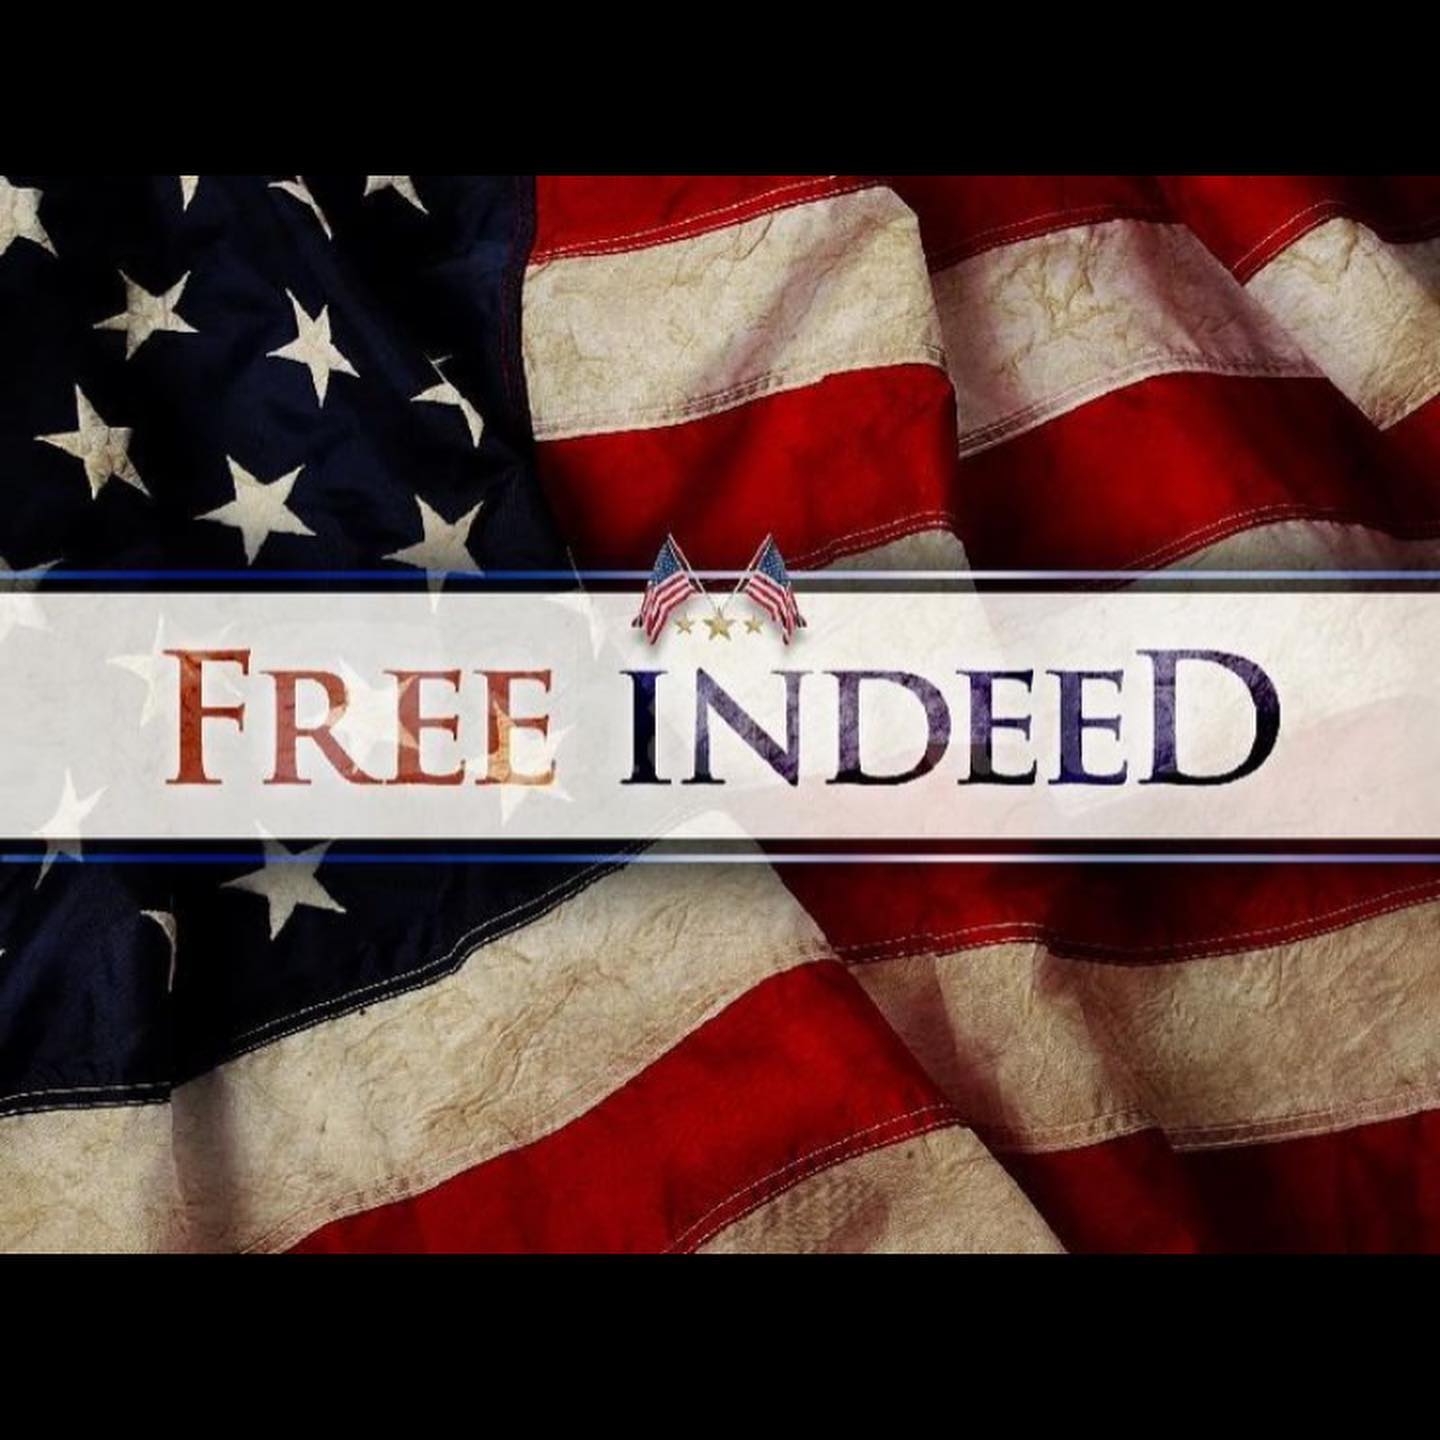 A nation is only as free as its citizens, and if they are in bondage to sin, so is the nation. Liberty and Freedom are God’s glorious ideas, and He wants us to know the Truth, which shall make us free! Join us Sunday 10AM @fallbrookvineyardchurch as Dave Baxter teaches our American heritage as it relates to the Gospel of Jesus Christ and the LIBERTY God sent His Son to die for. Bring your bibles, friends, neighbors, chairs, and show your patriotism Come ready to sing all your favorite Patriotic Hymns! #thetruthshallmakeyoufree#liberty#independence#freedominchrist#patriotichymns#jesus#thewaythetruththelife#thebible#prayer #repentance#lifeabundant#community #support #love#familyofgod #outdoorchurch #organicchurch #outlawchurch #dogfriendlychurch#fallbrookvineyardchurch#thevineyard1924